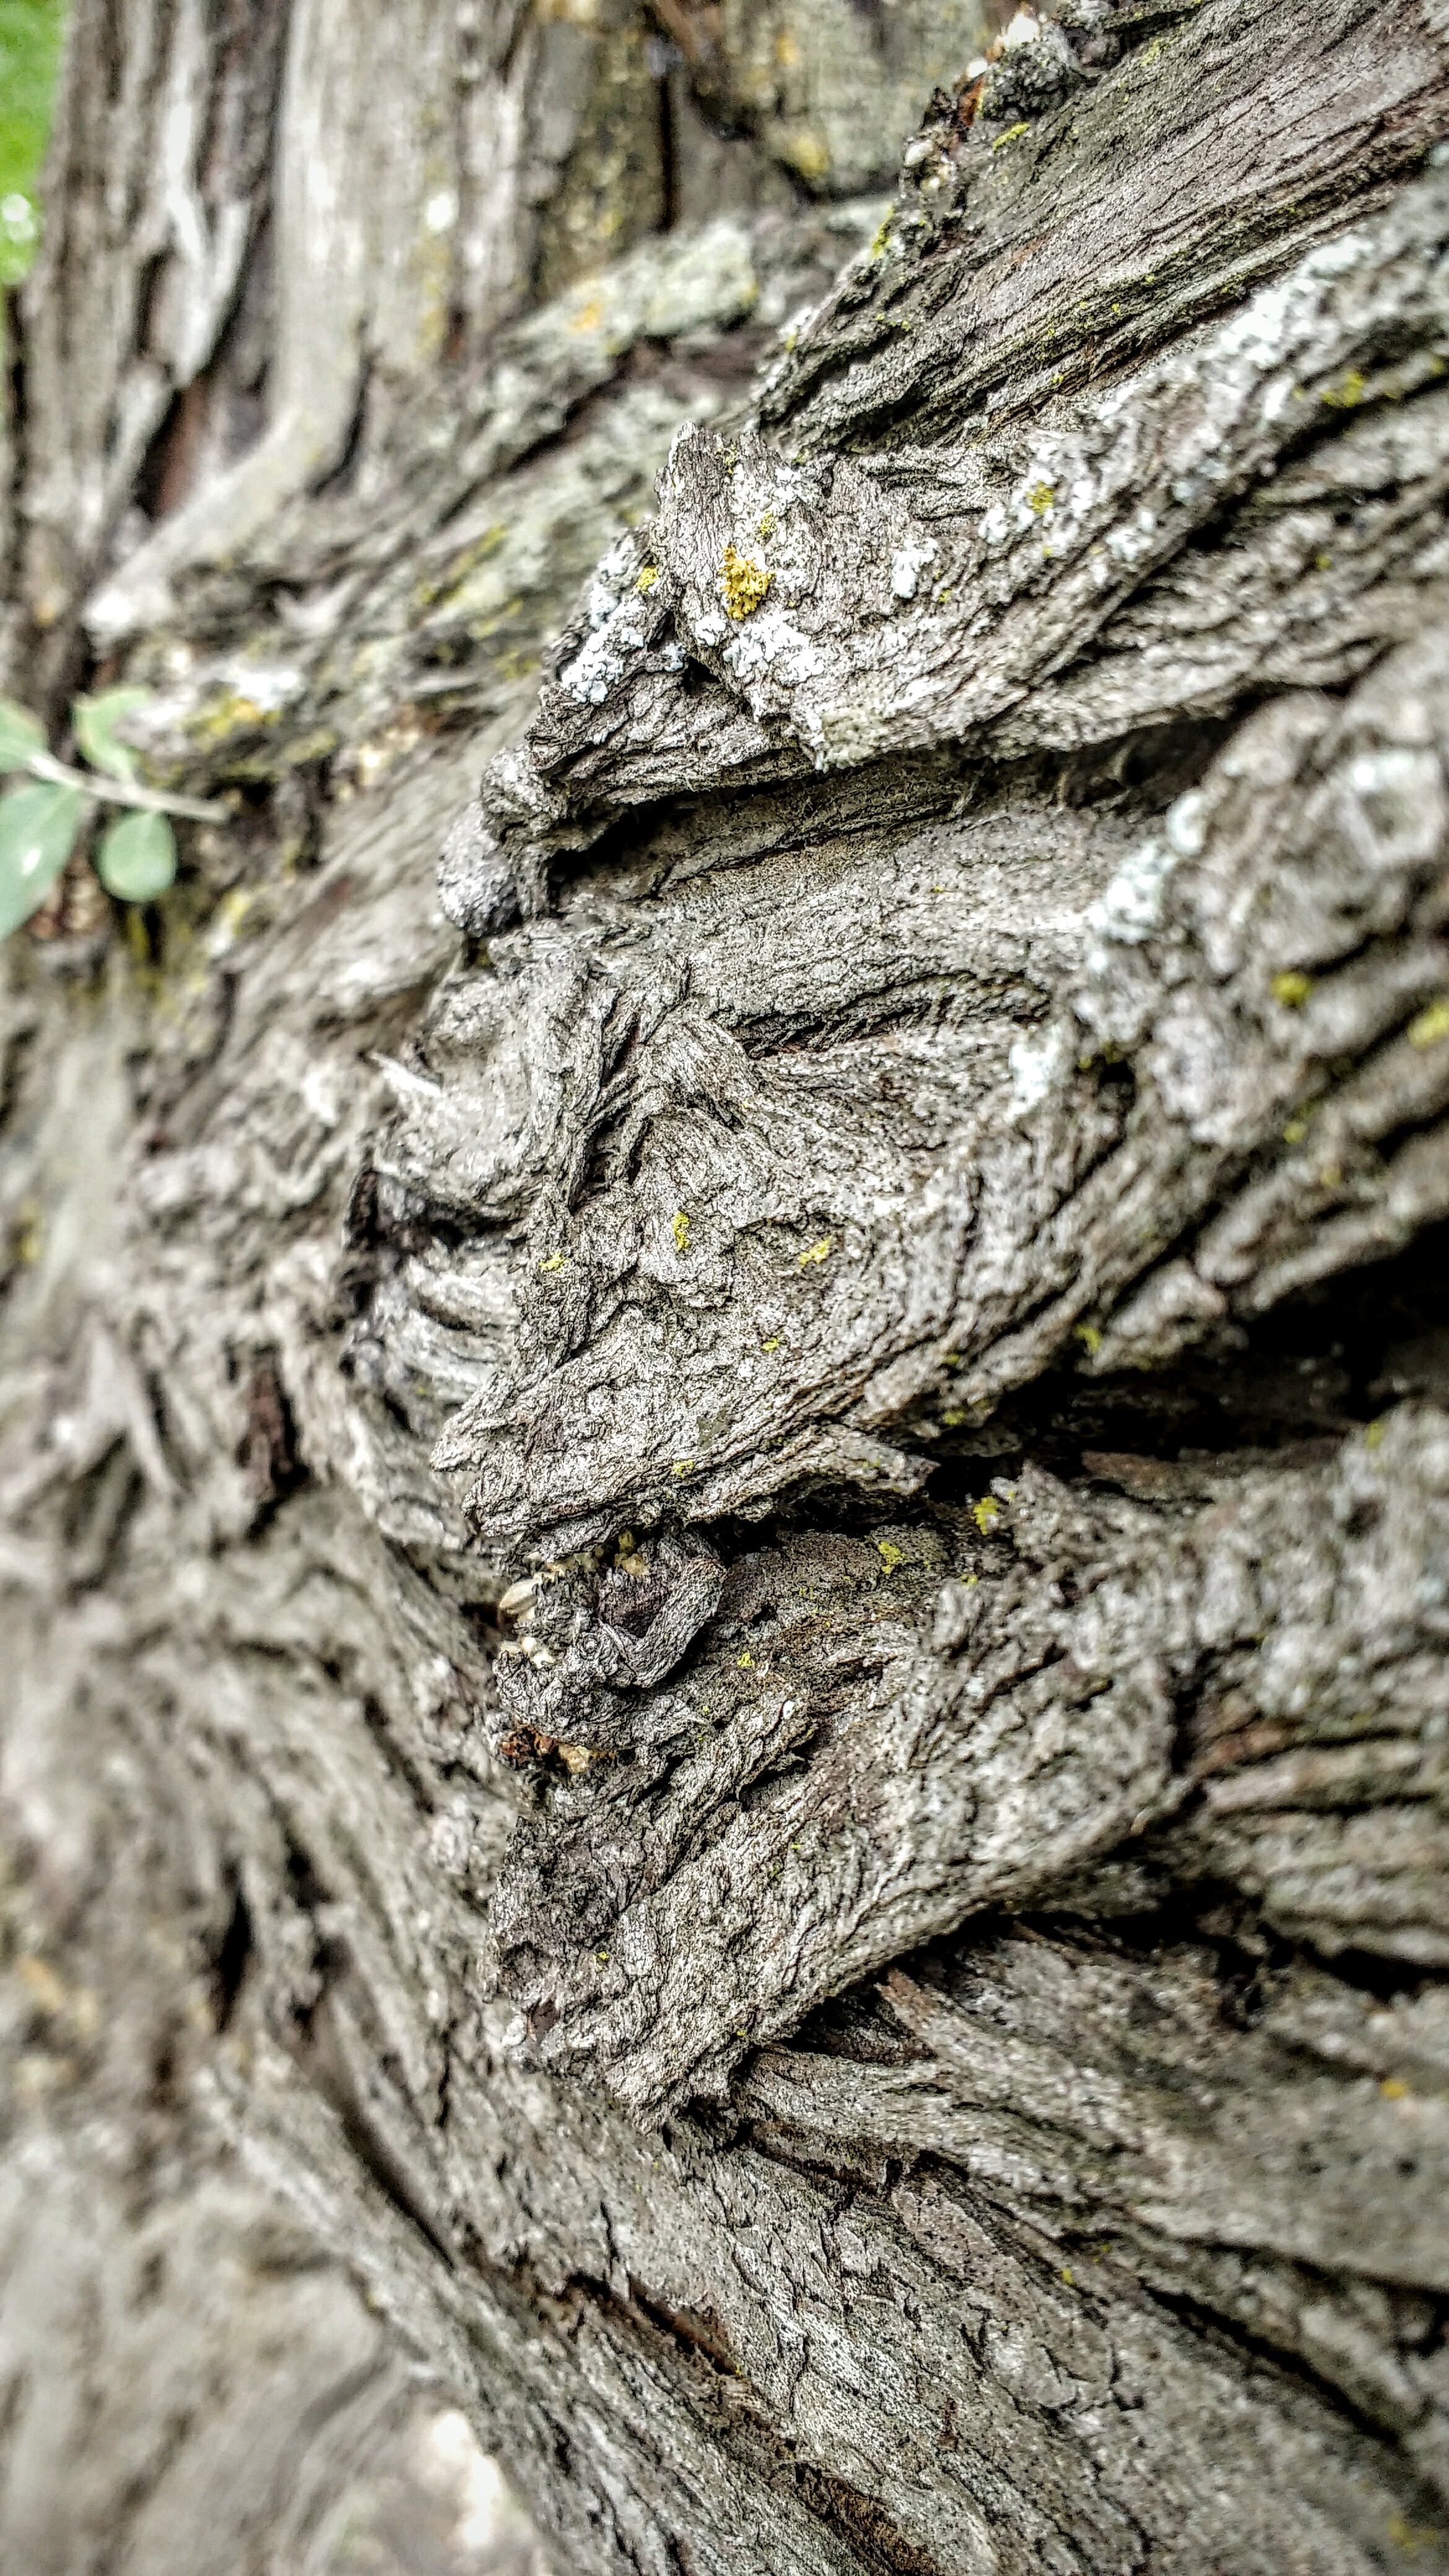 The old wrinkled tree photo